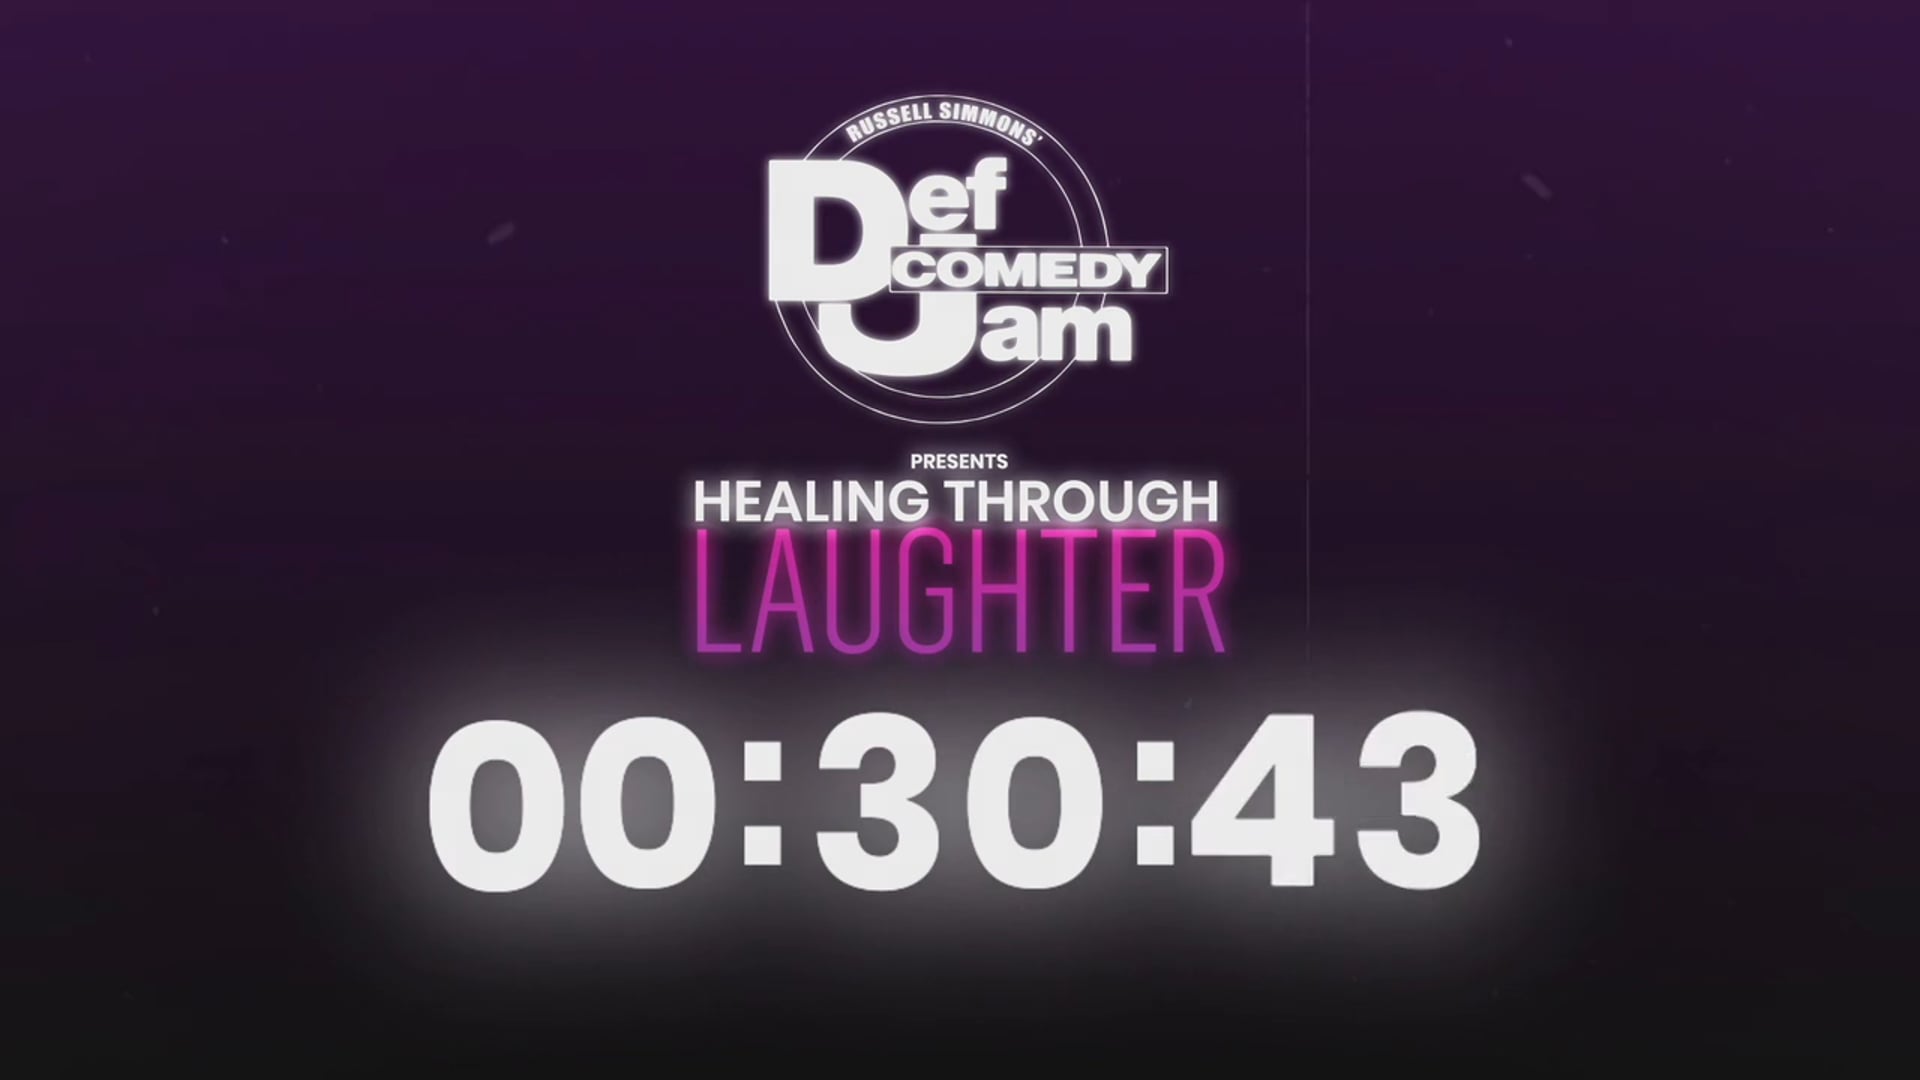 Def Jam Comedy: "Healing Through Laughter"